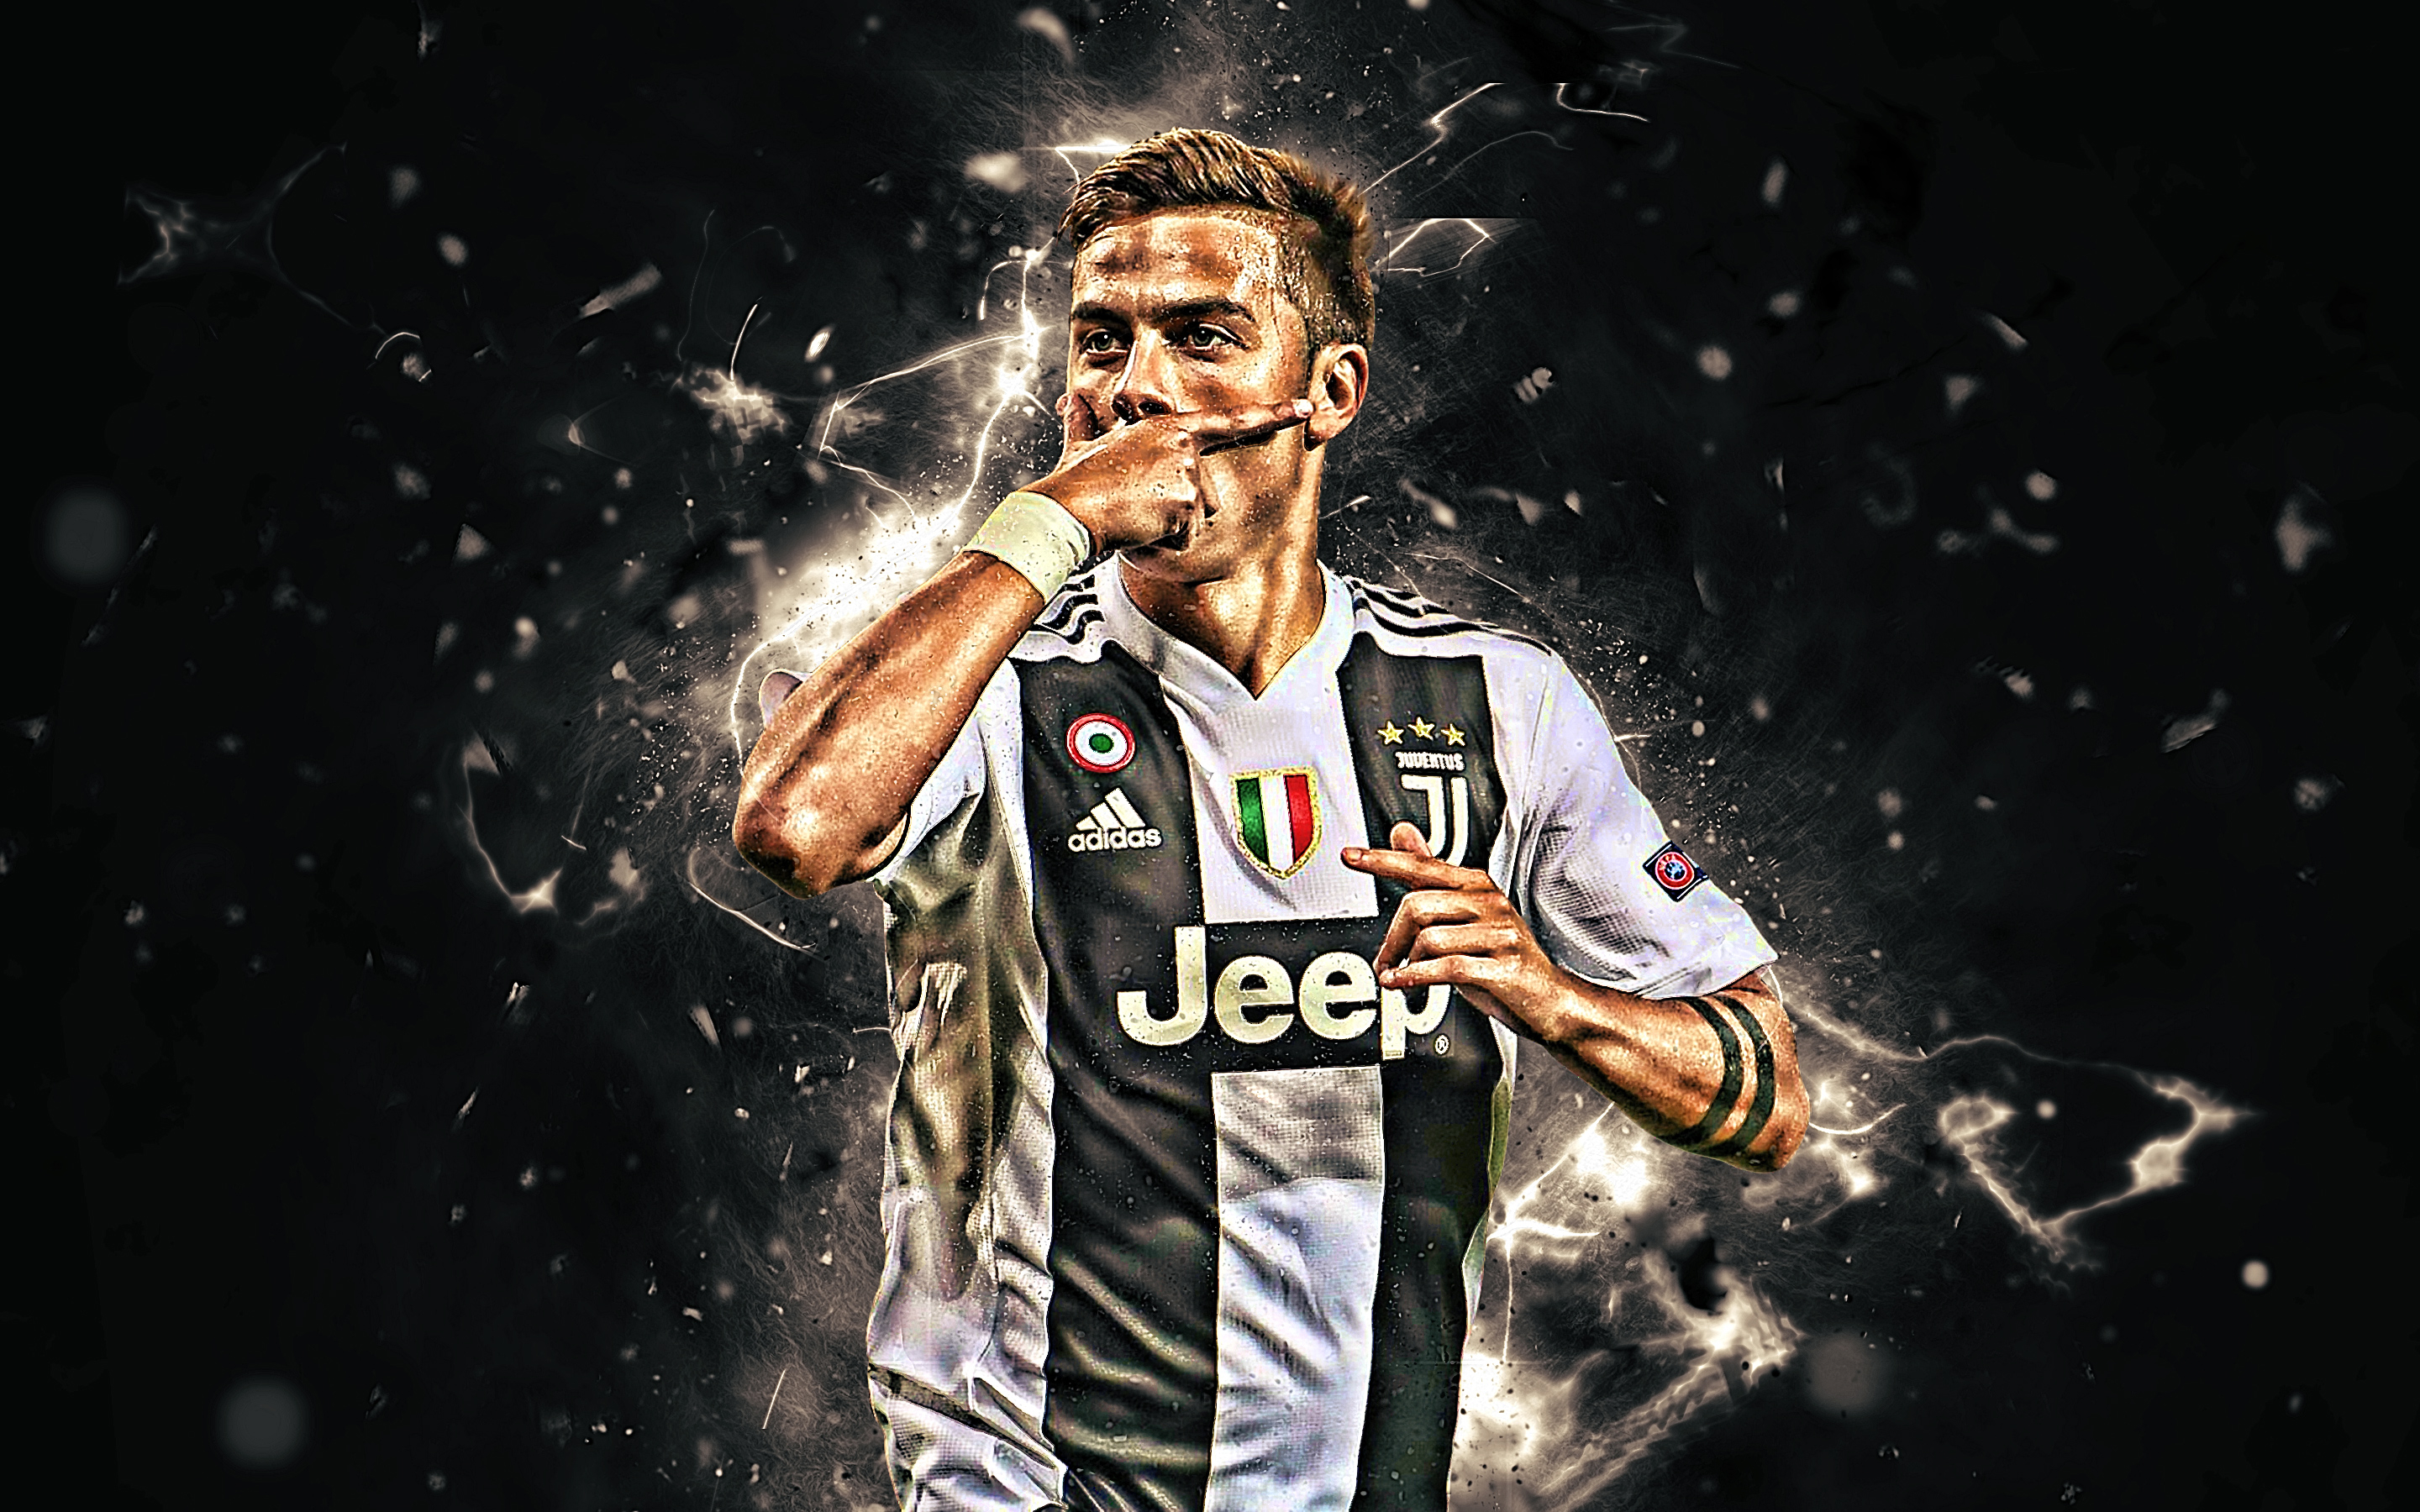 Paulo Dybala wallpapers for desktop, download free Paulo Dybala pictures  and backgrounds for PC 